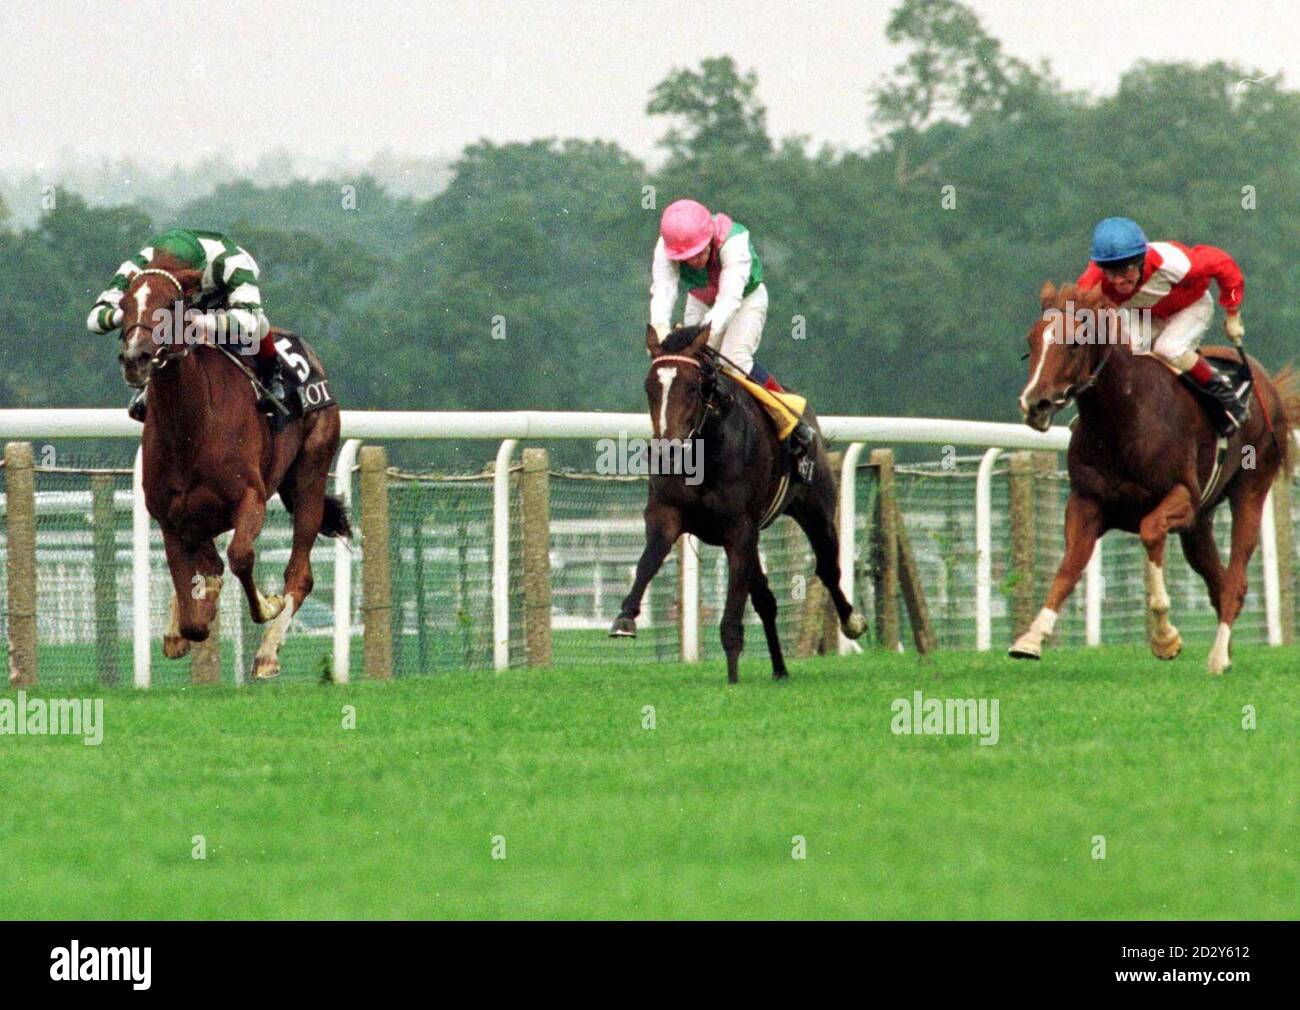 Glorosia ridden by Frankie Dettori (left) winning the Fillies Mile  at Ascot today (Sunday) from Jibe (centre) ridden by K.Fallon and Exclusive , M.J.Kinane 3rd (right). Photo by Martyn Hayhow. Stock Photo